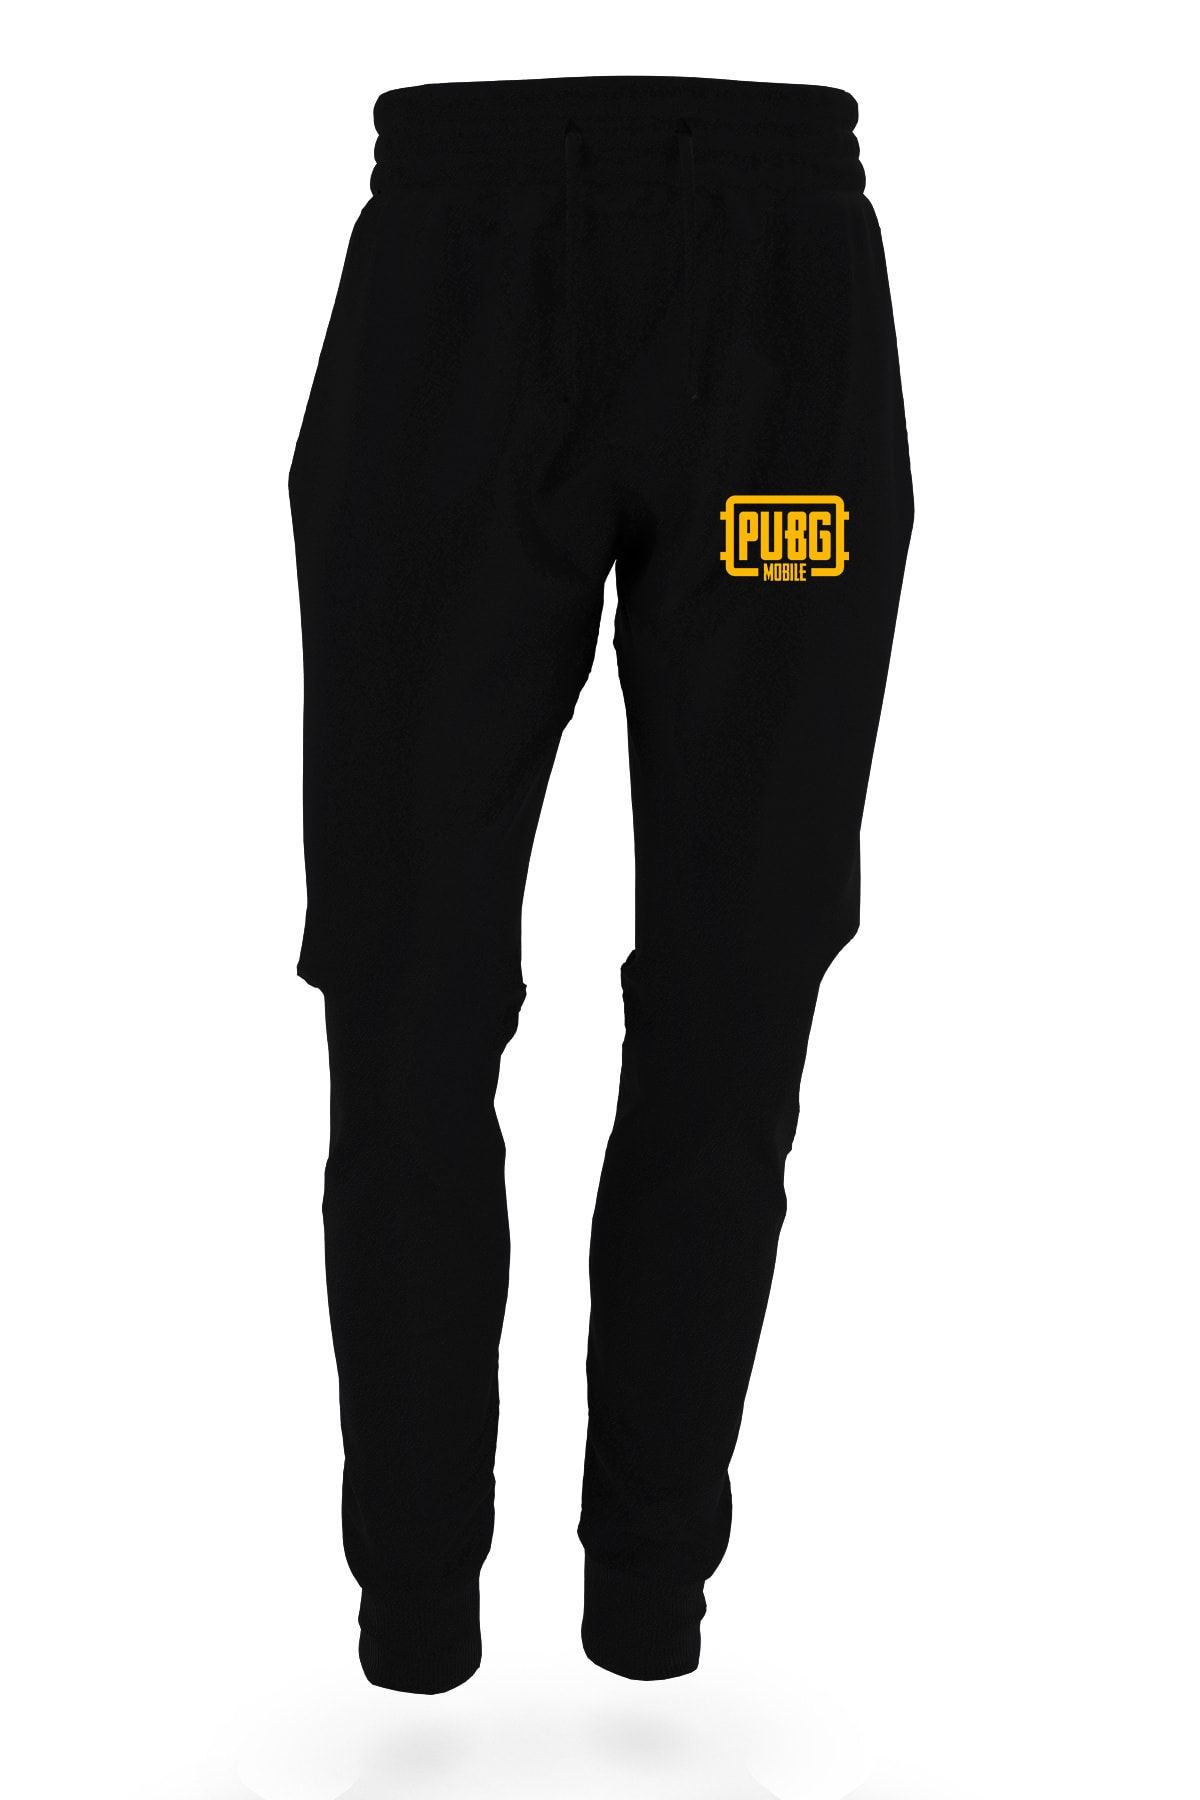 PlayerUnknown's Battlegrounds PUBG Tracksuit Top Pants Outfit Cosplay  Costume Buy